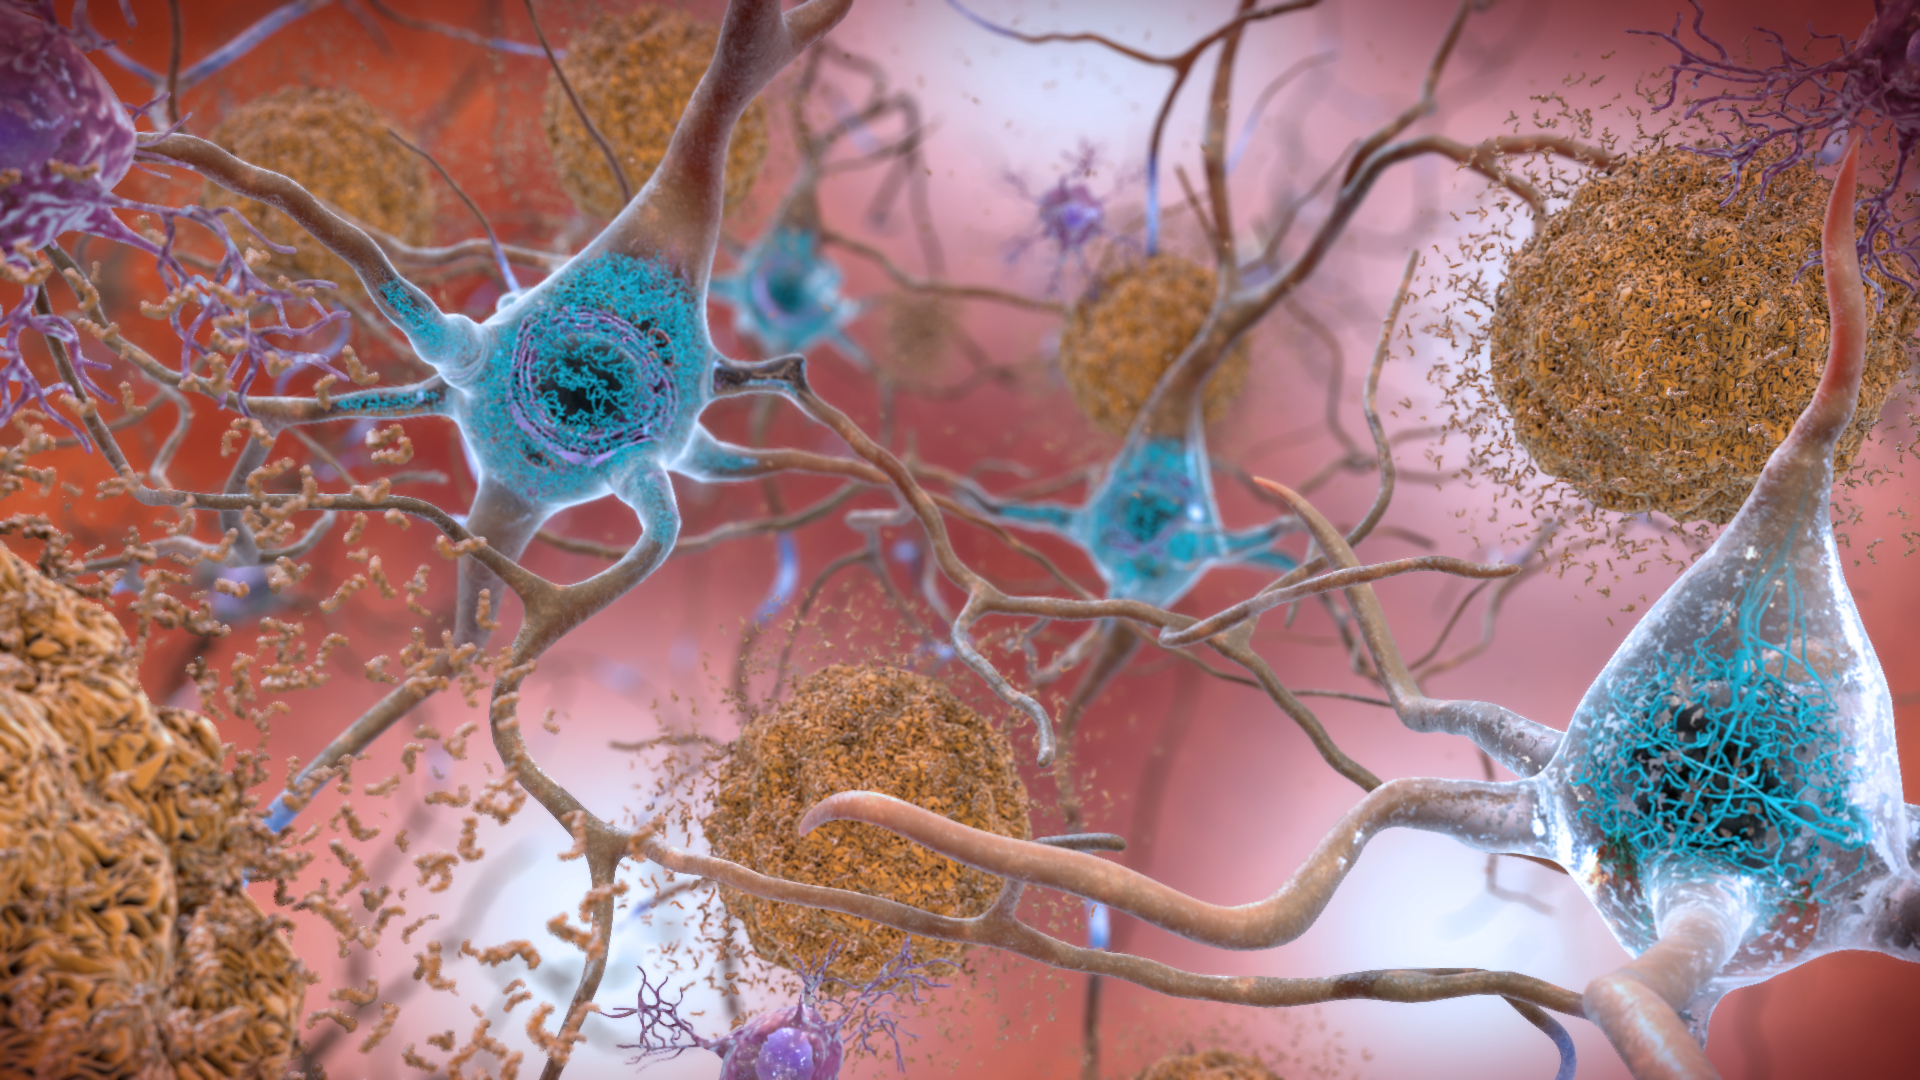 A close up of a neuron that has been effected by alzheimers